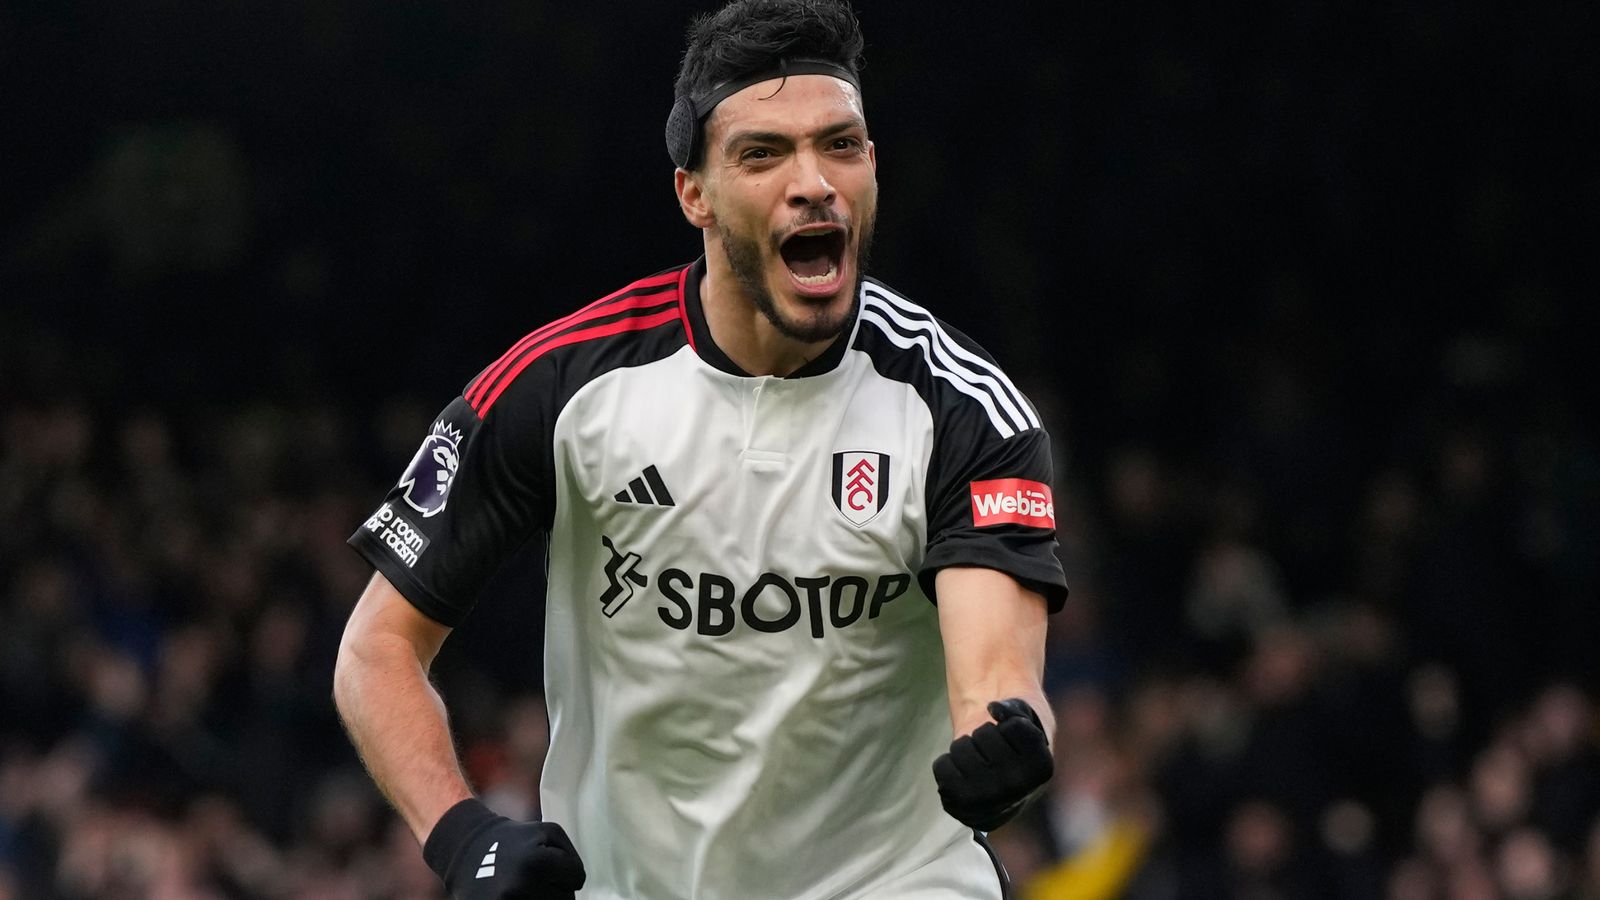 Fulham comeback stuns Arsenal who miss out on top spot again